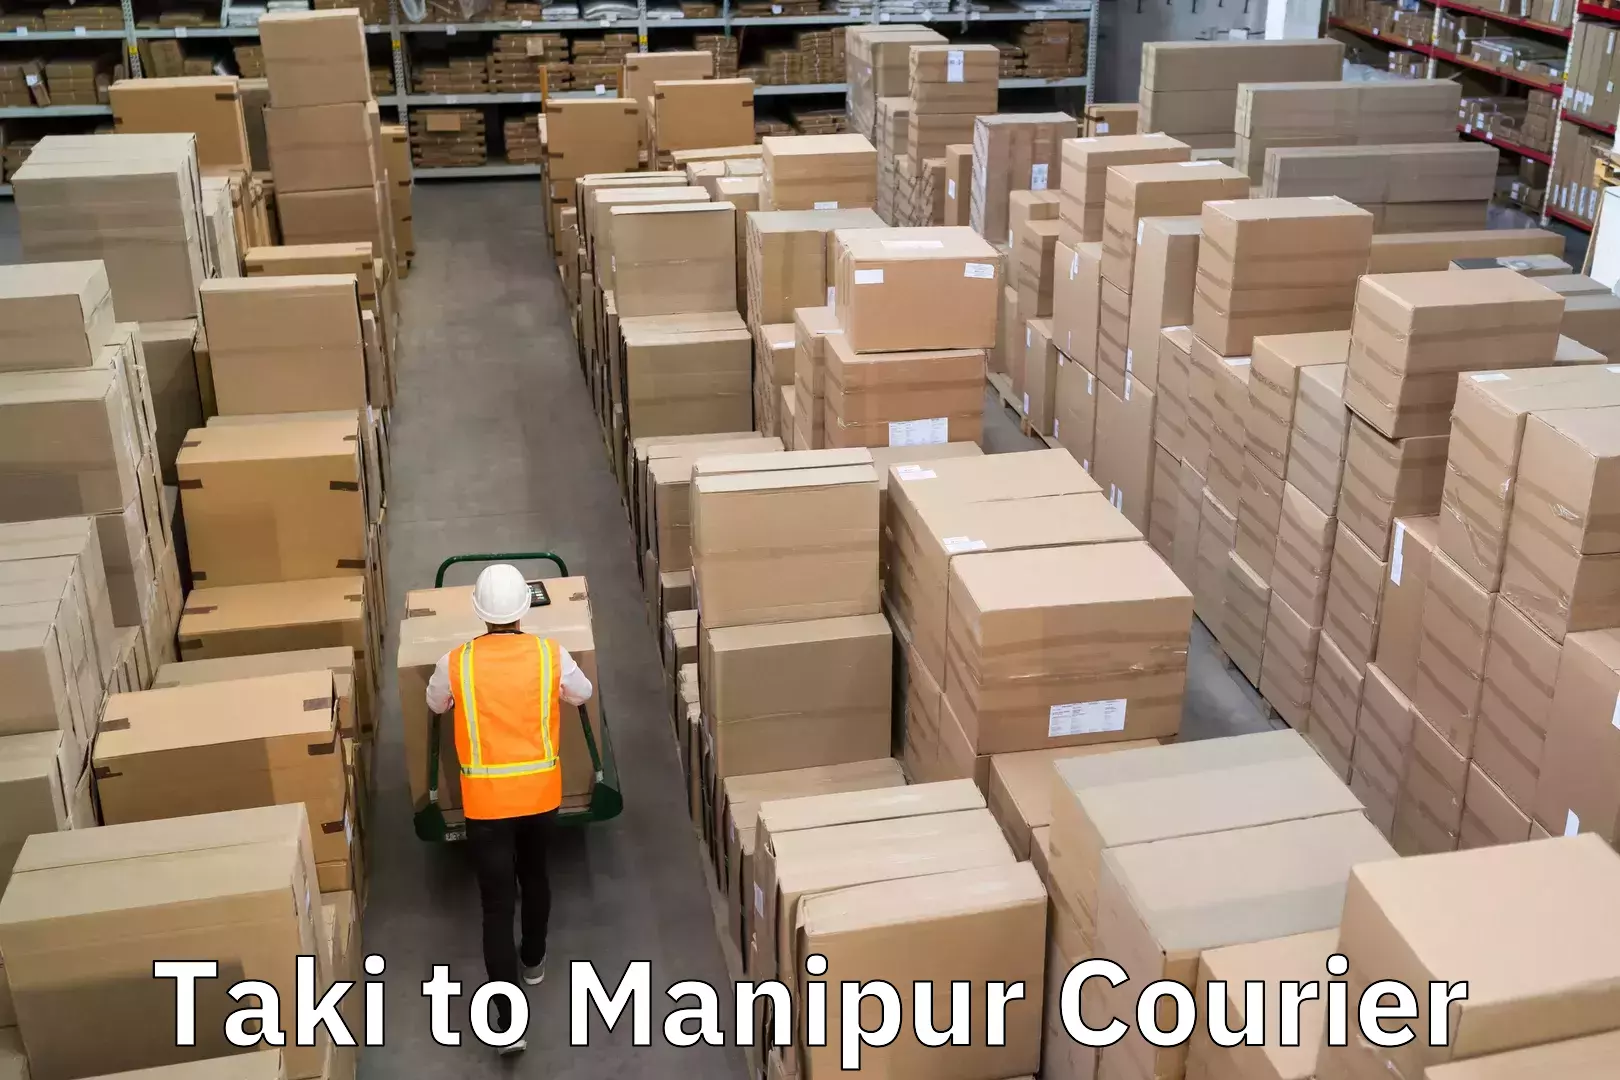 Customer-focused courier Taki to Manipur